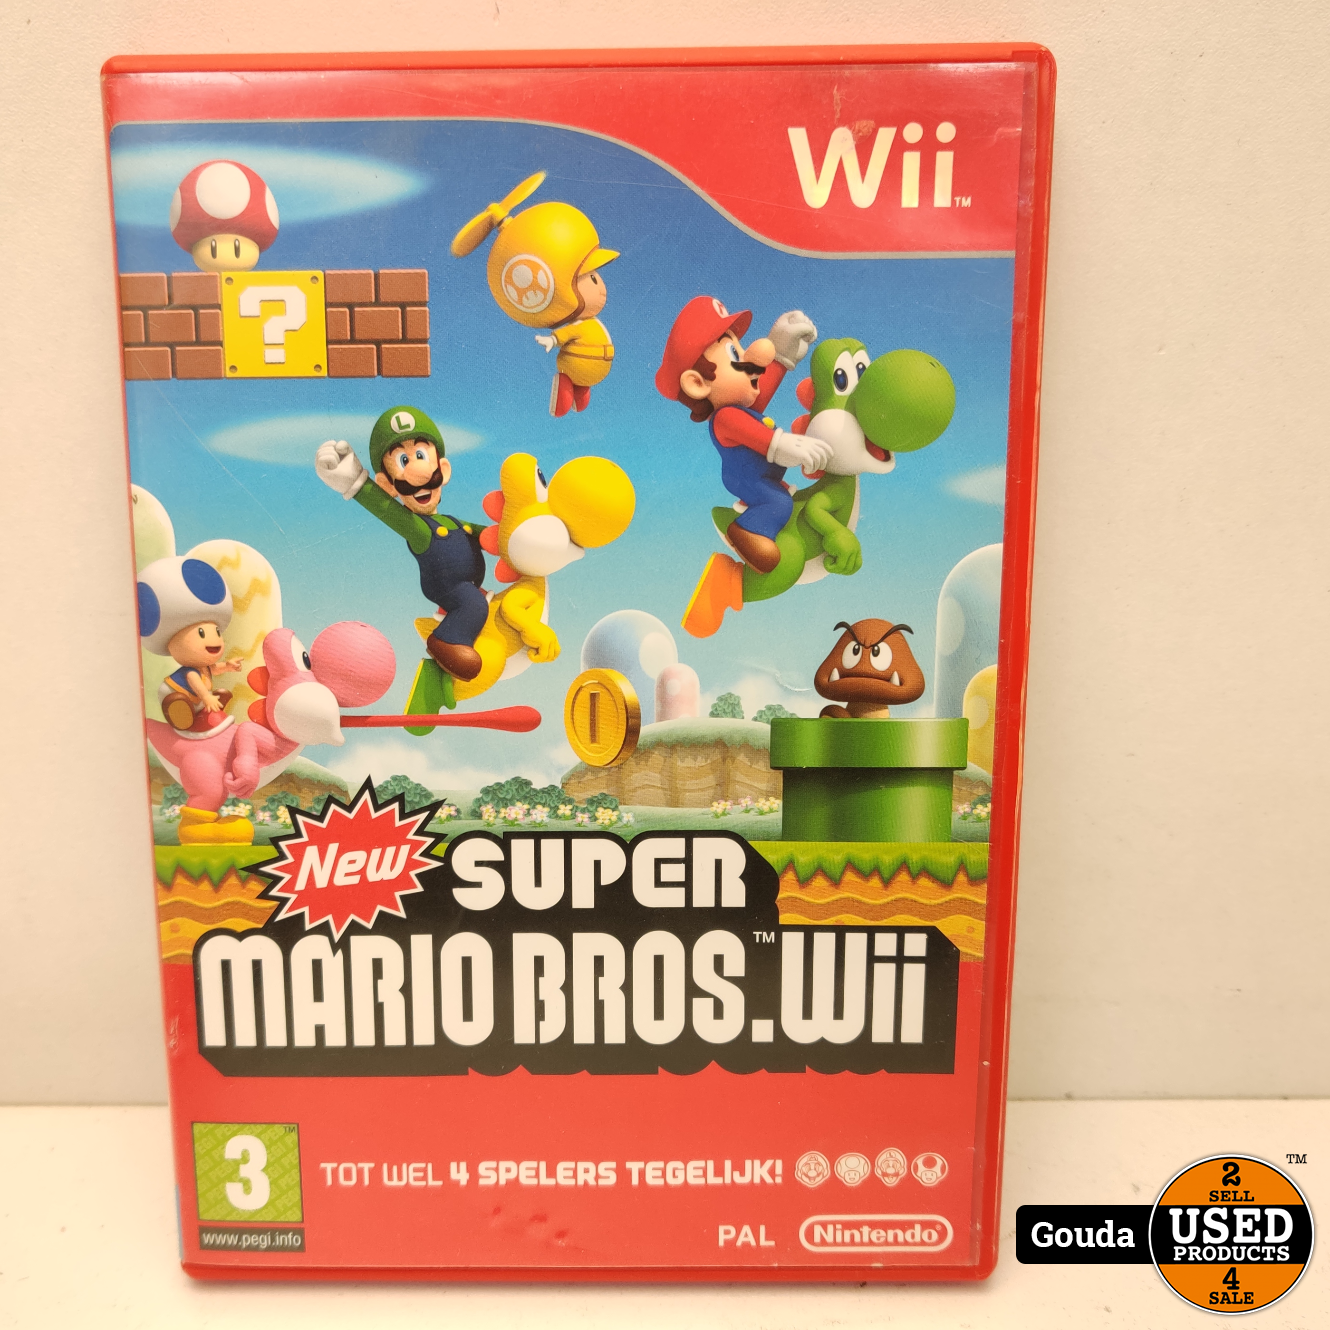 super bros wii - Used Products Gouda